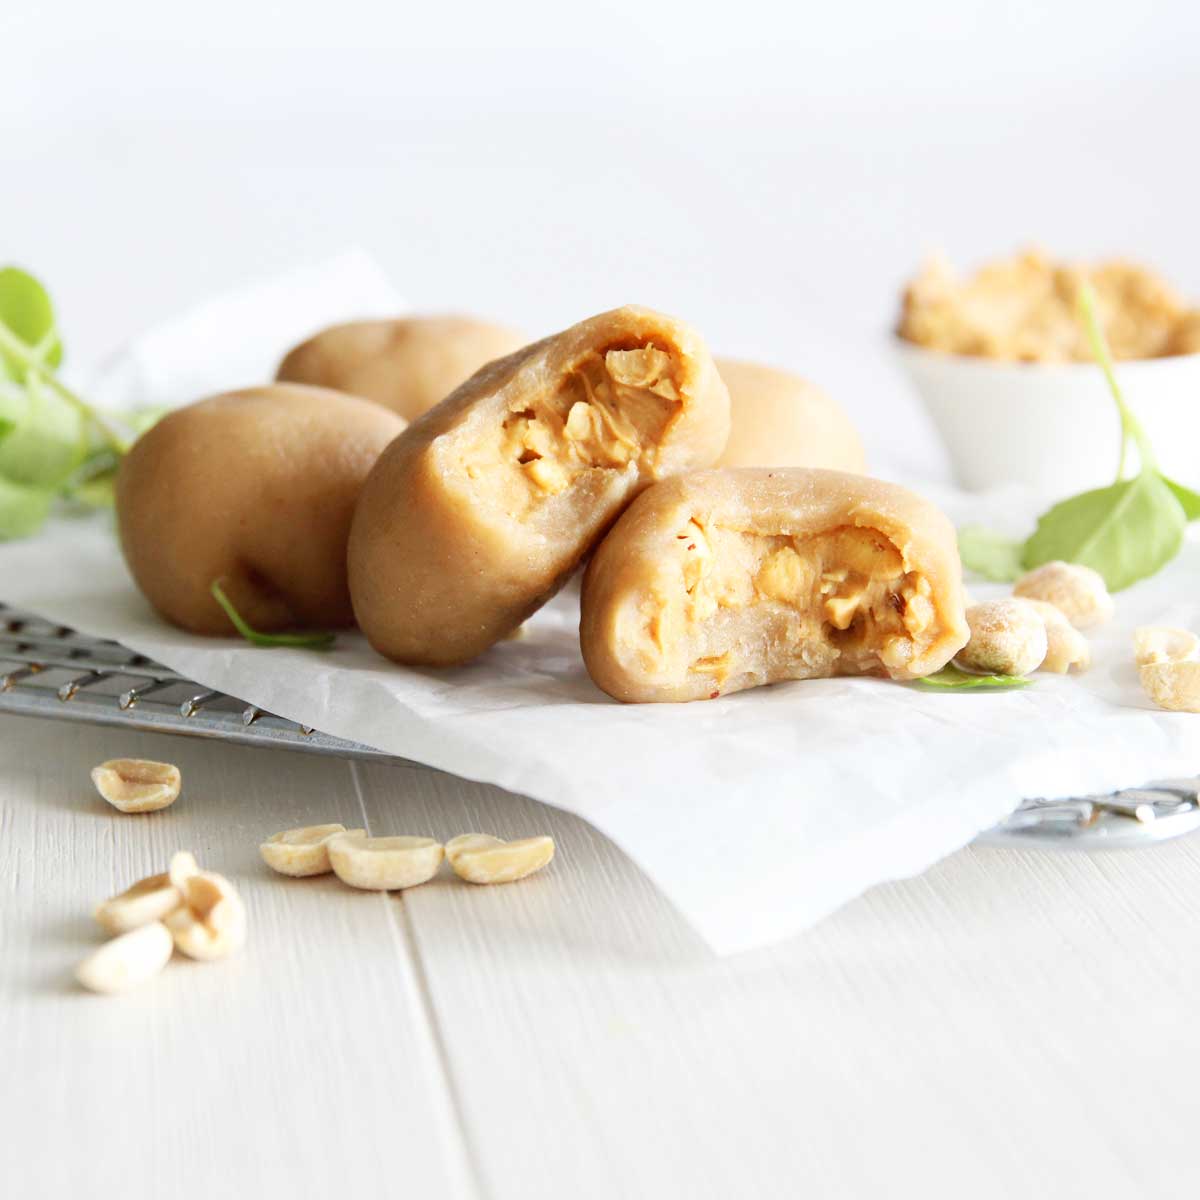 Chinese-Styled Peanut Butter Mochi Made in the Microwave - Zucchini Flatbread